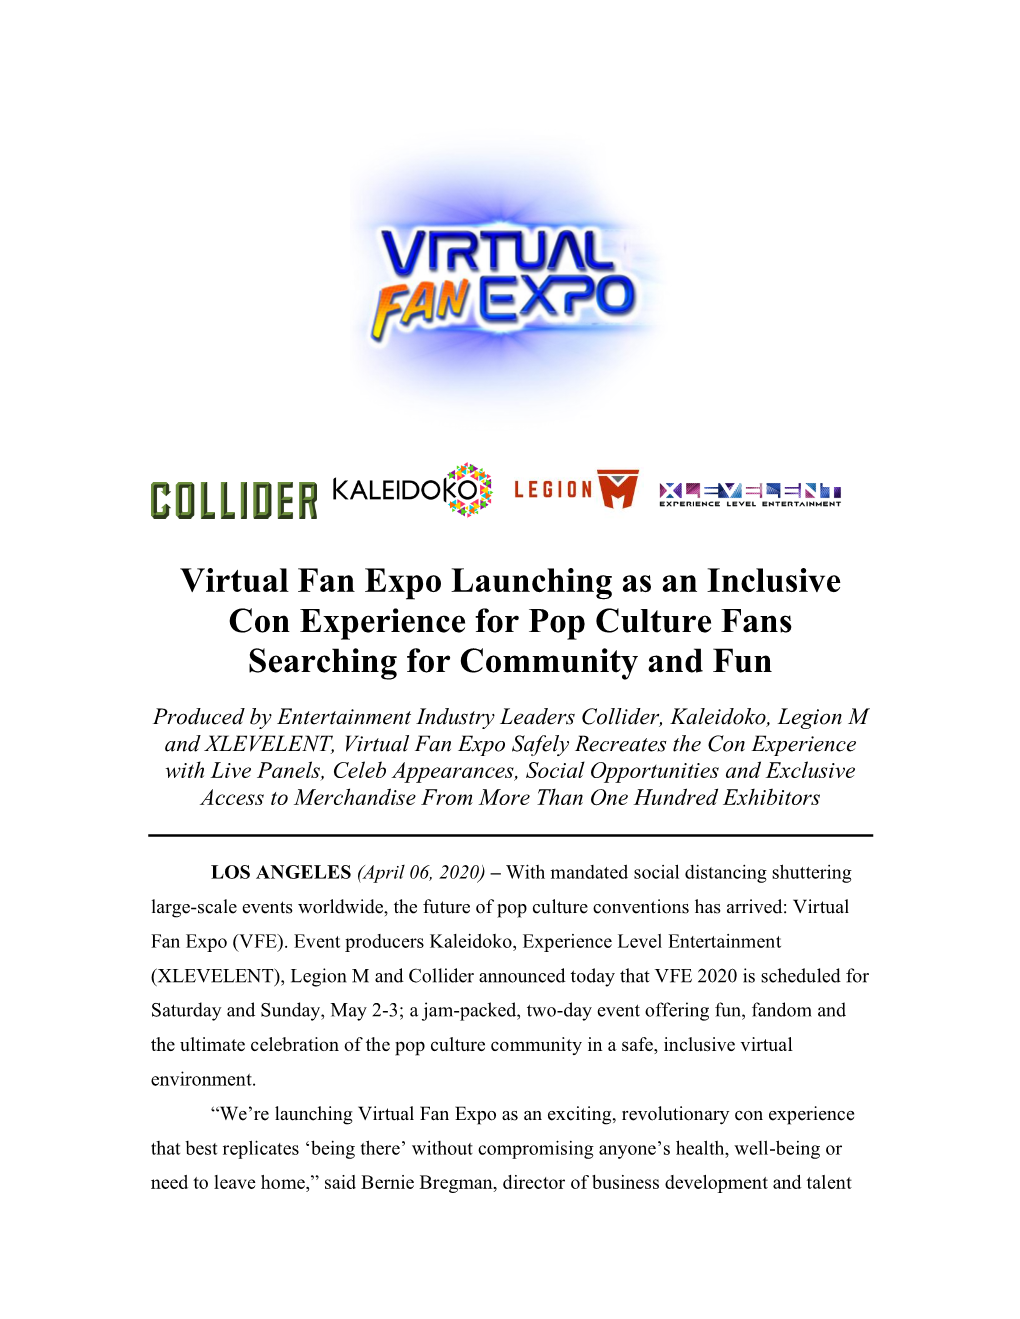 Virtual Fan Expo Launching As an Inclusive Con Experience for Pop Culture Fans Searching for Community and Fun